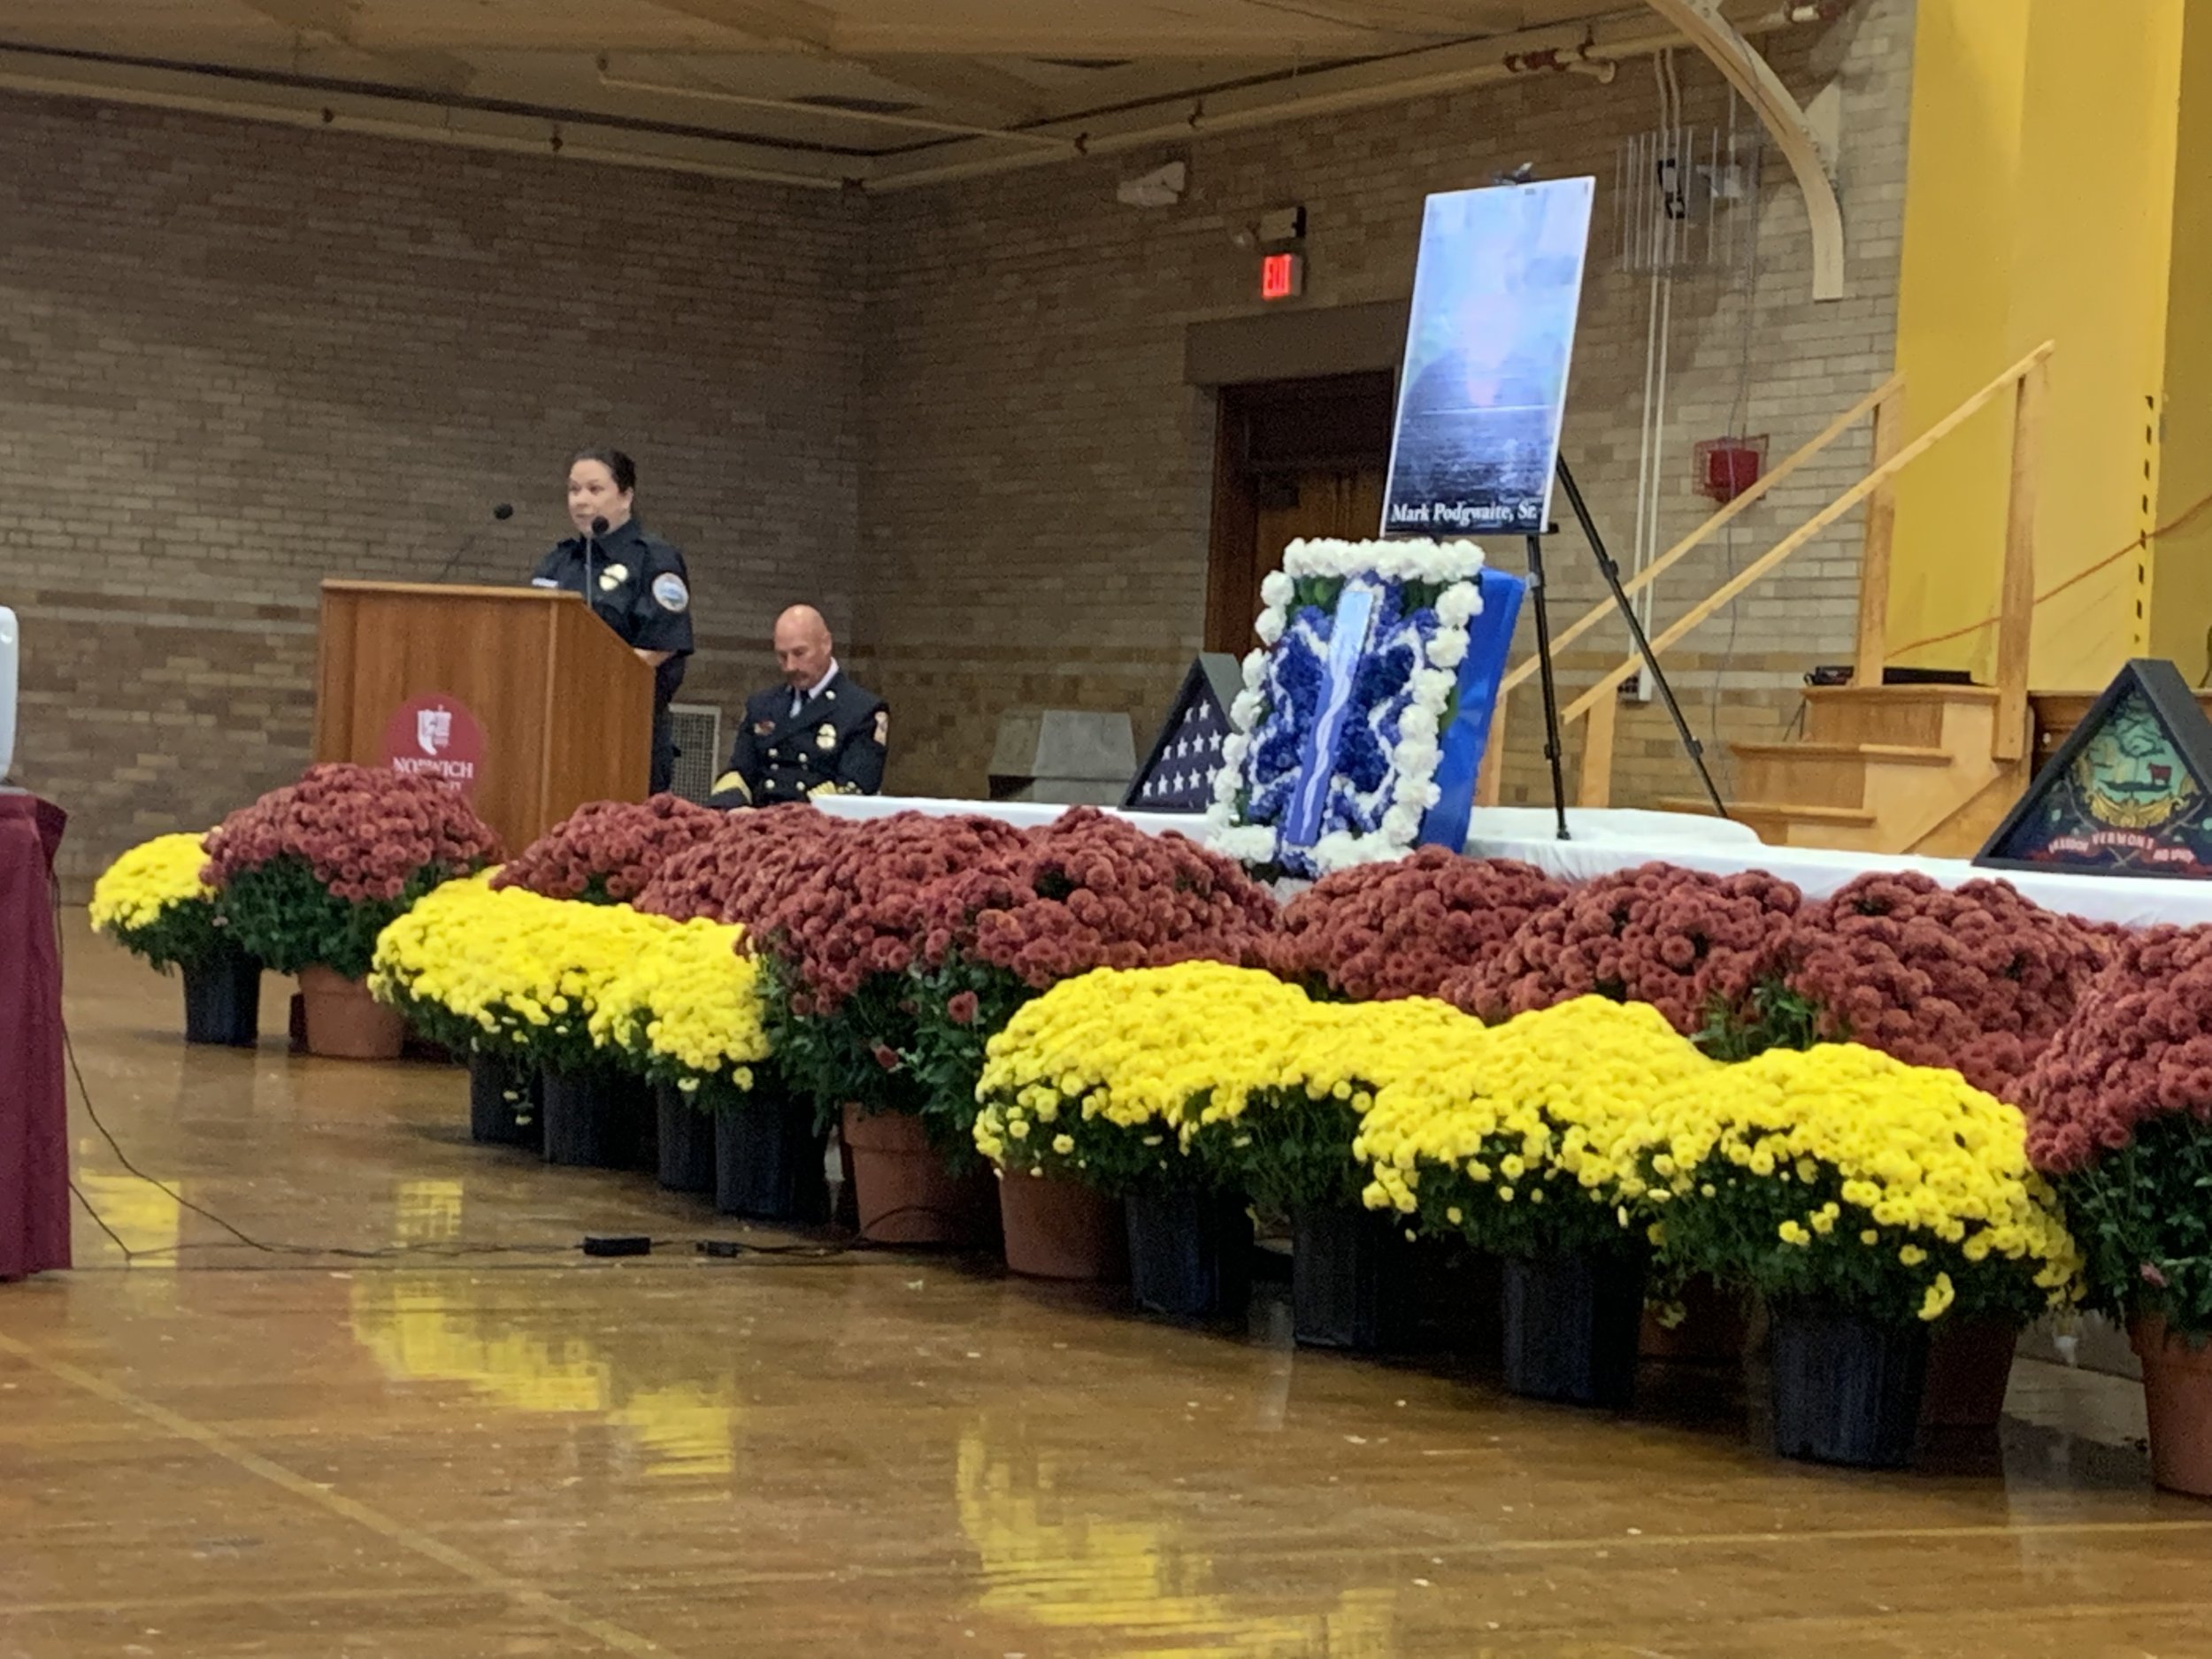  Mark Podgwaite’s colleague Maggie Burke-Greiner, now in the role of interim executive director of Waterbury Ambulance, shares her remarks. Photo by Lisa Scagliotti 